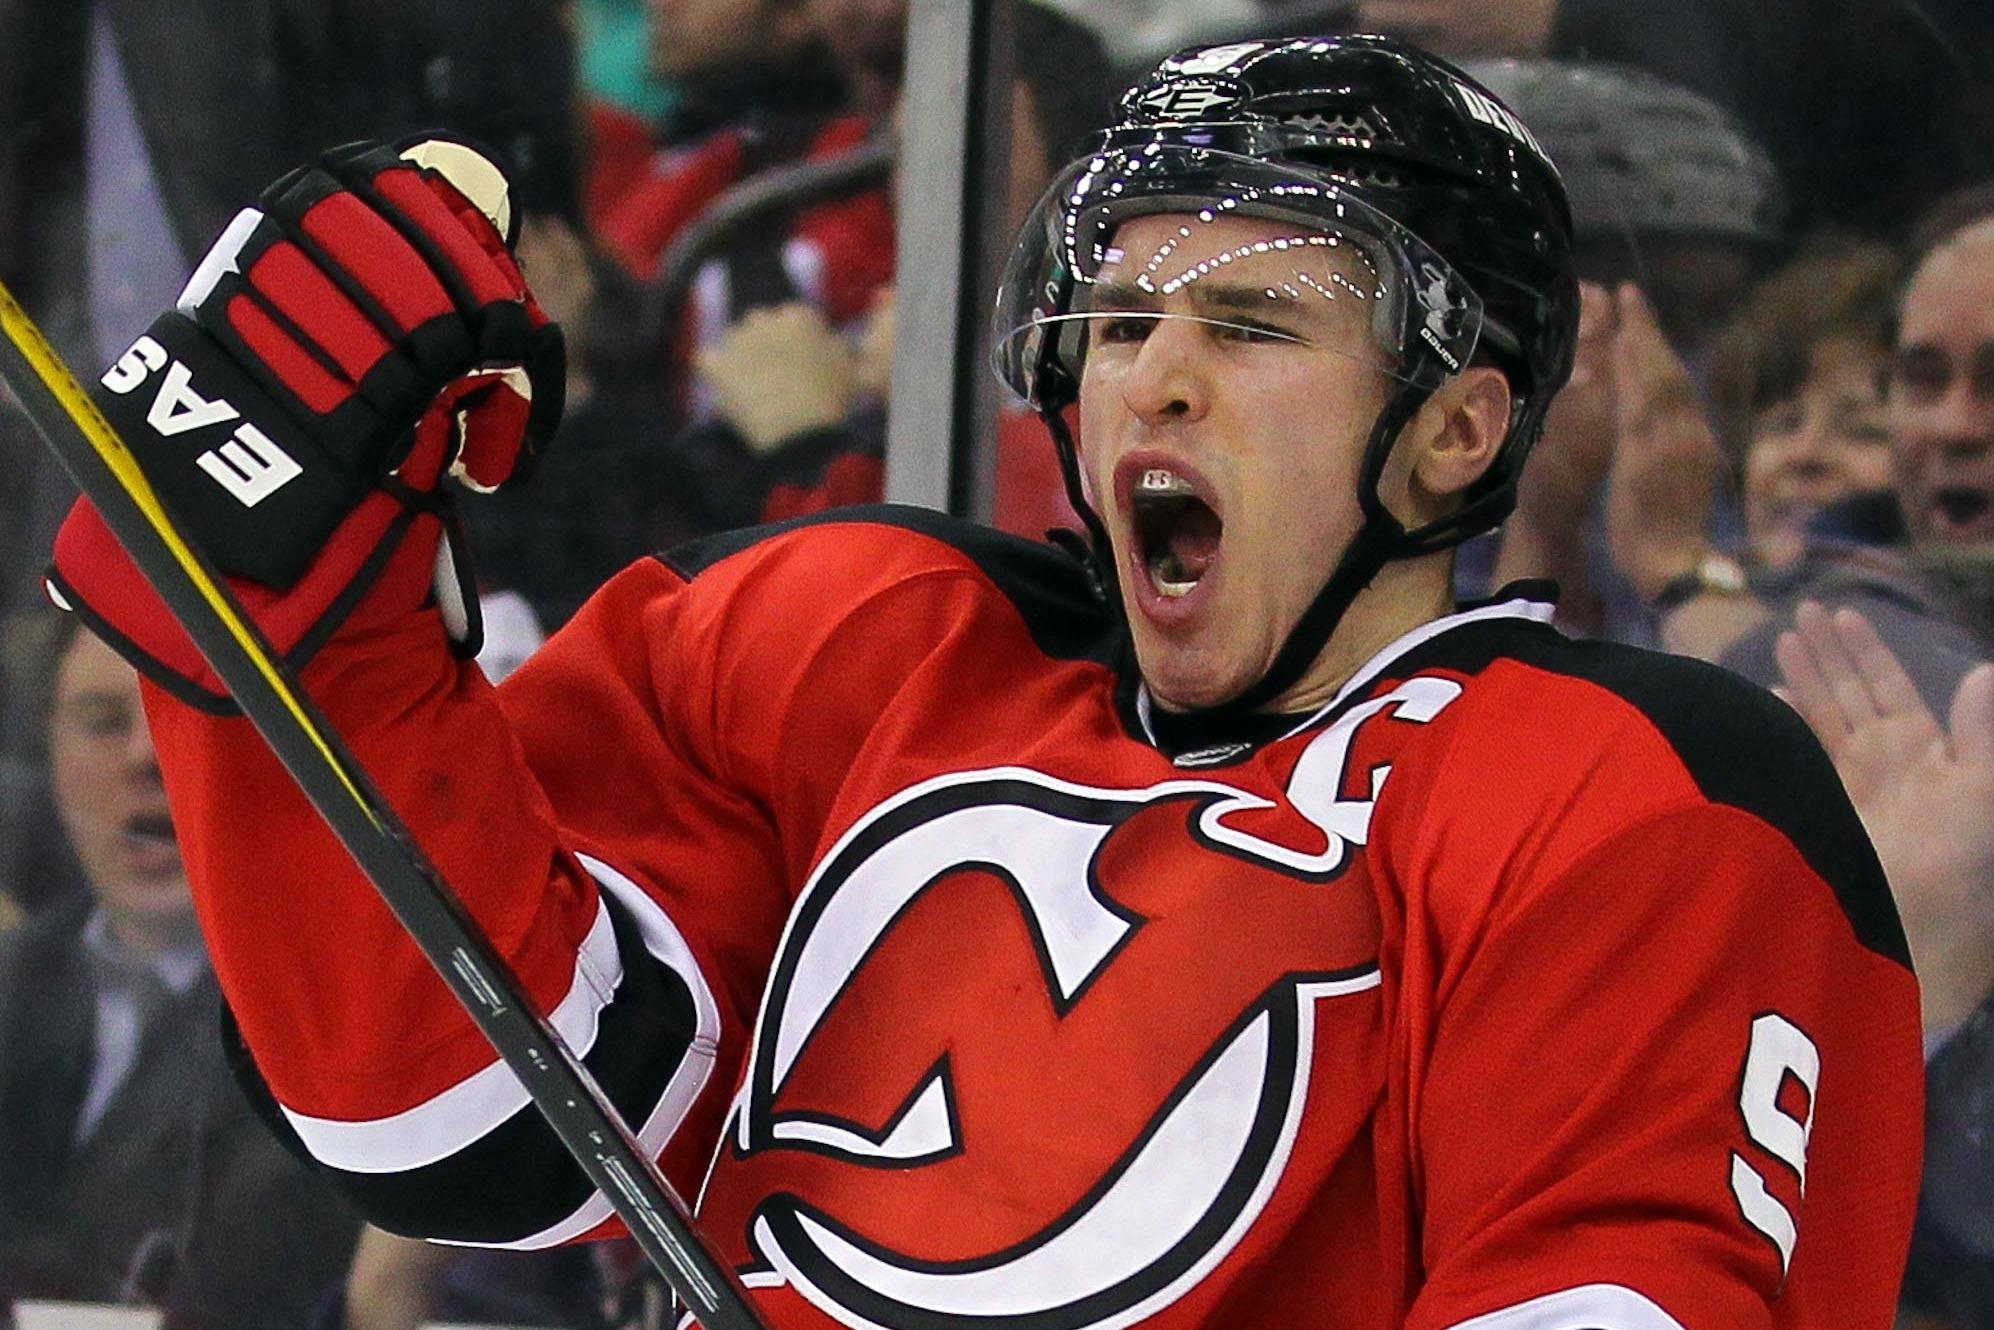 New Jersey Devils lose winger Zach Parise for three months due to